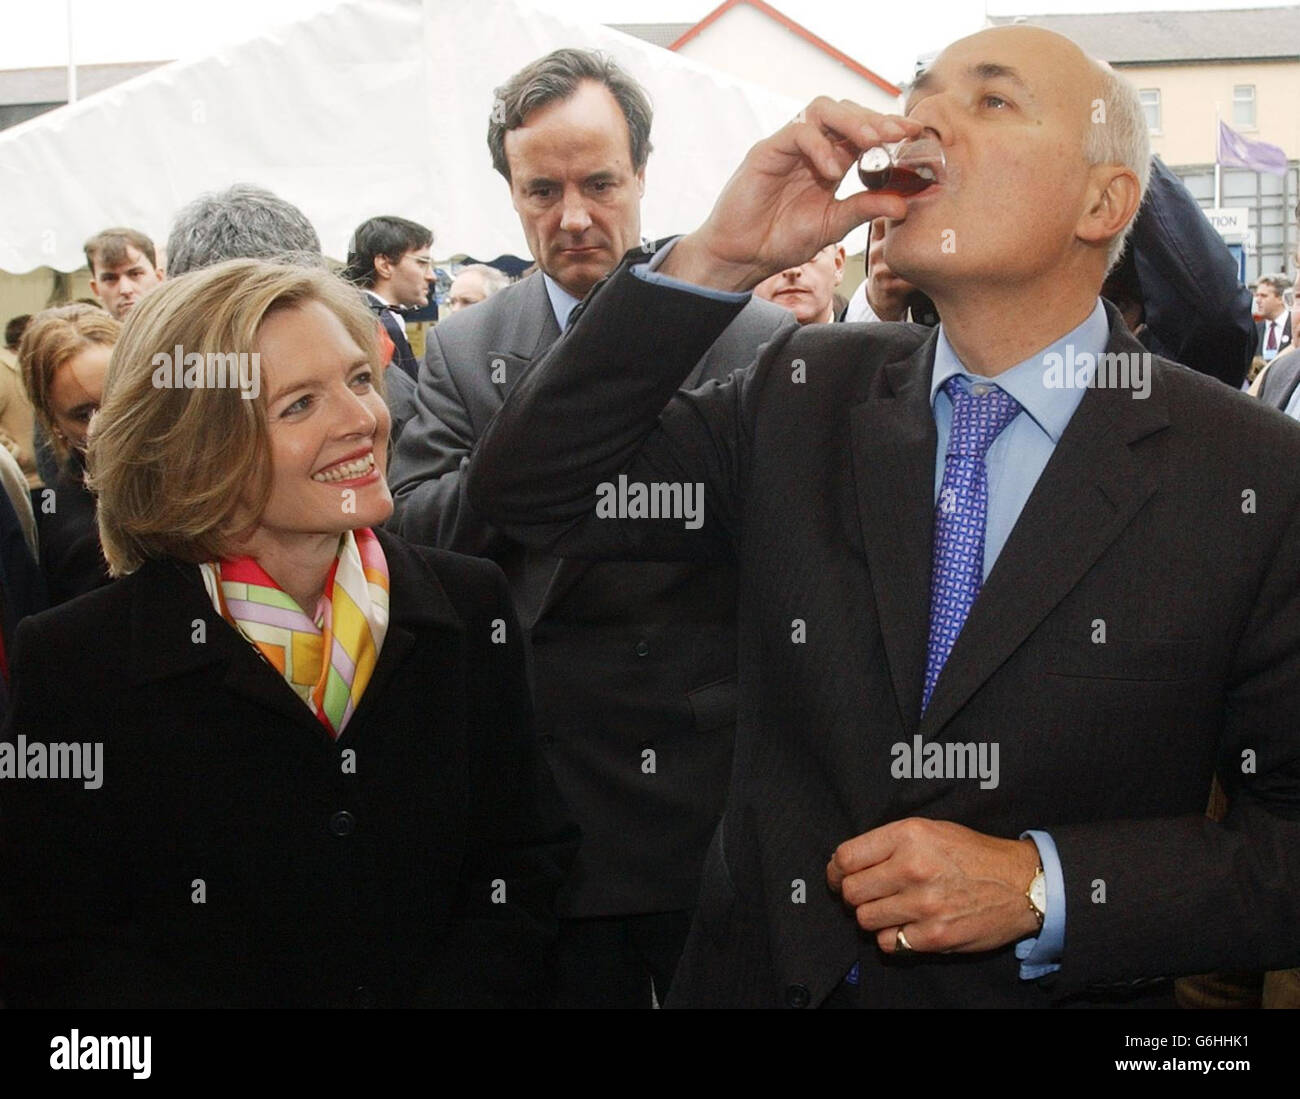 Conservative Party leader Iain Duncan Smith and his wife Betsy sample some gin as they tour a farmers' market in Blackpool. Earlier today, Mr Duncan Smith brushed aside suggestions that the party's 'men in grey suits' were set to call time on his leadership. Amid claims that up to 15 Tory backbenchers were calling for a vote of no confidence in his leadership, Mr Duncan Smith insisted that his focus was on ending Tony Blair's premiership. With the Conservative annual conference in Blackpool entering its second day, focusing upon dissent, Europe and taxation, Mr Duncan Smith insisted he would Stock Photo